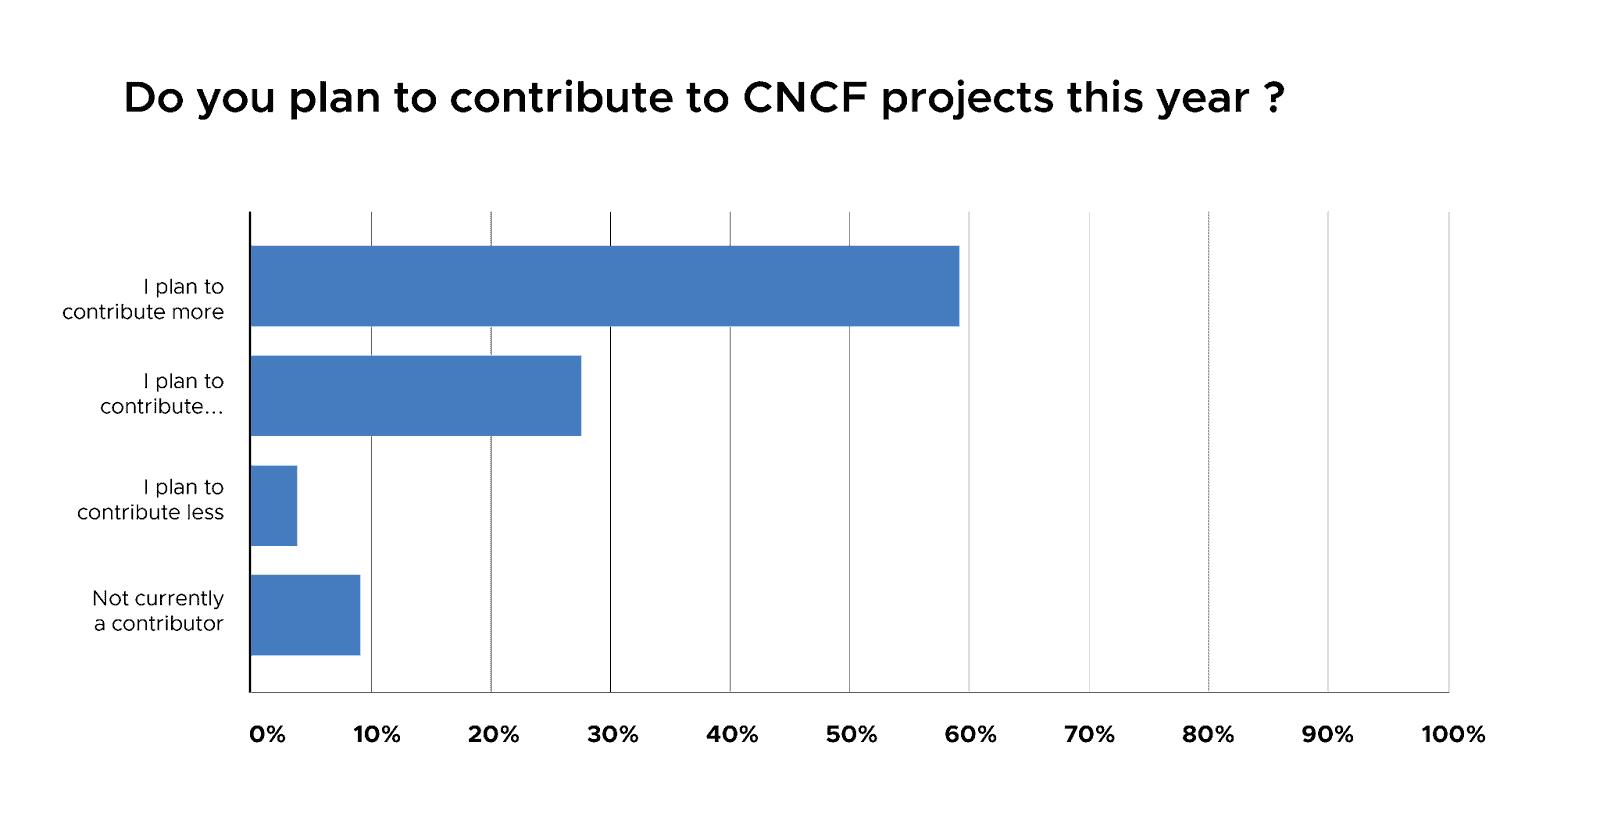 Bar chart showing 59% of the respondents voted "I plan to contribute more" to question "Do you plan to contribute to CNCF projects this year?"